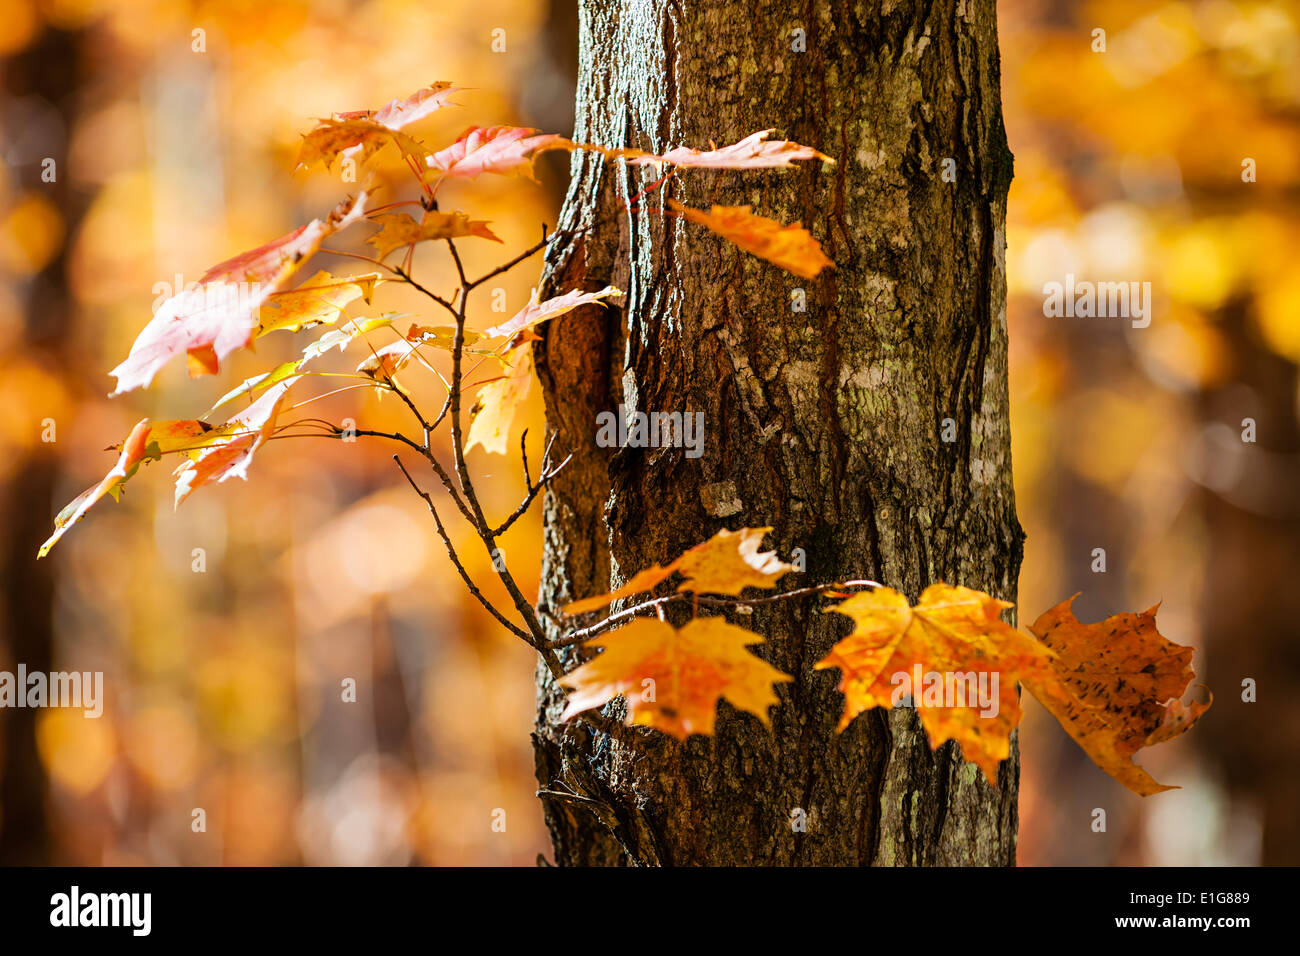 Trunk and branch of fall maple tree with bright orange foliage in sunny autumn forest Stock Photo